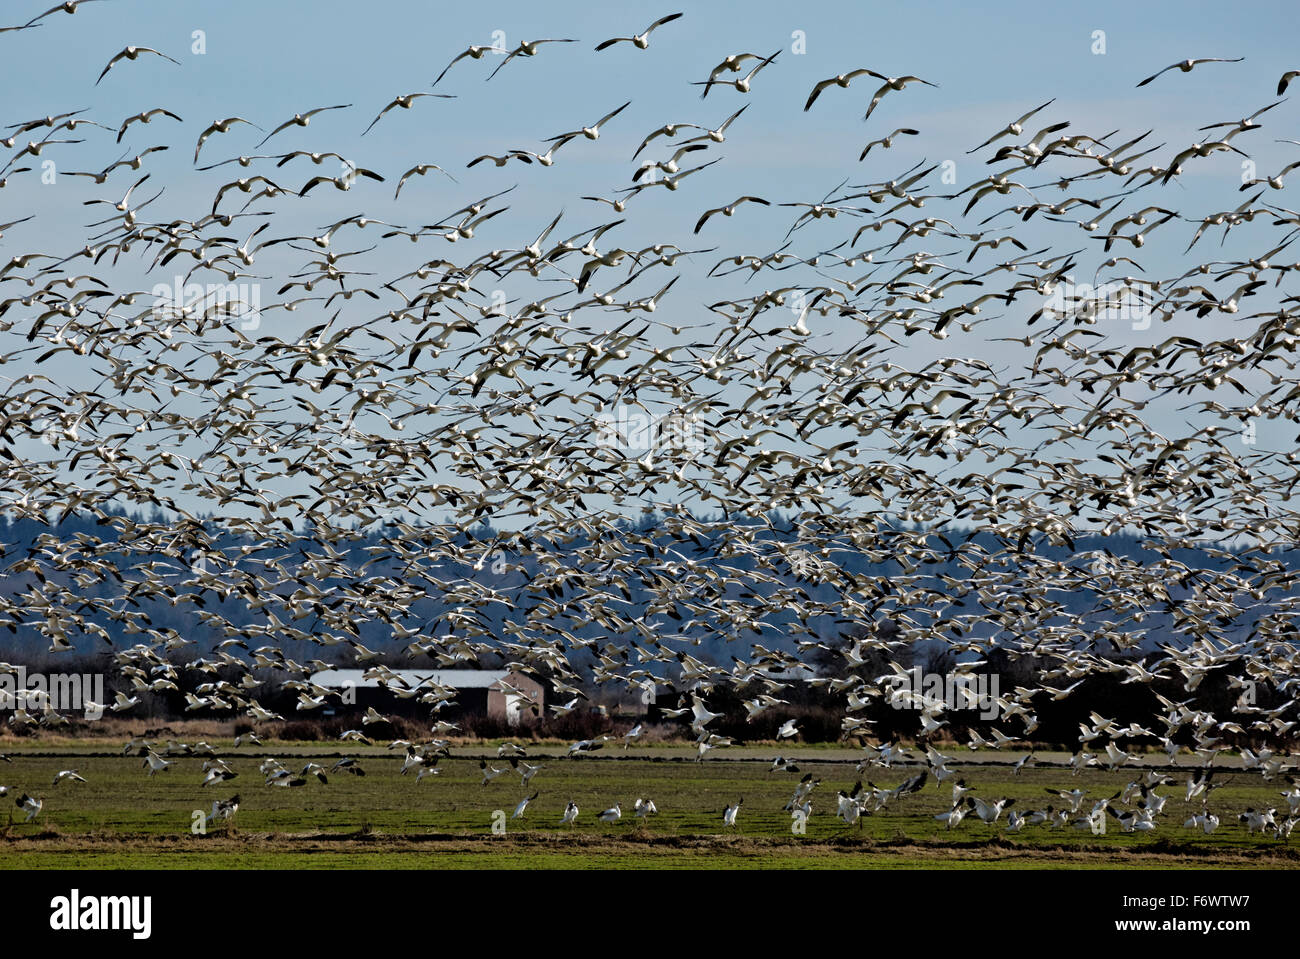 WASHINGTON - A large number of snow geese disturbed when a bald eagle flies across a nearby field in the Skagit Wildlife Area. Stock Photo